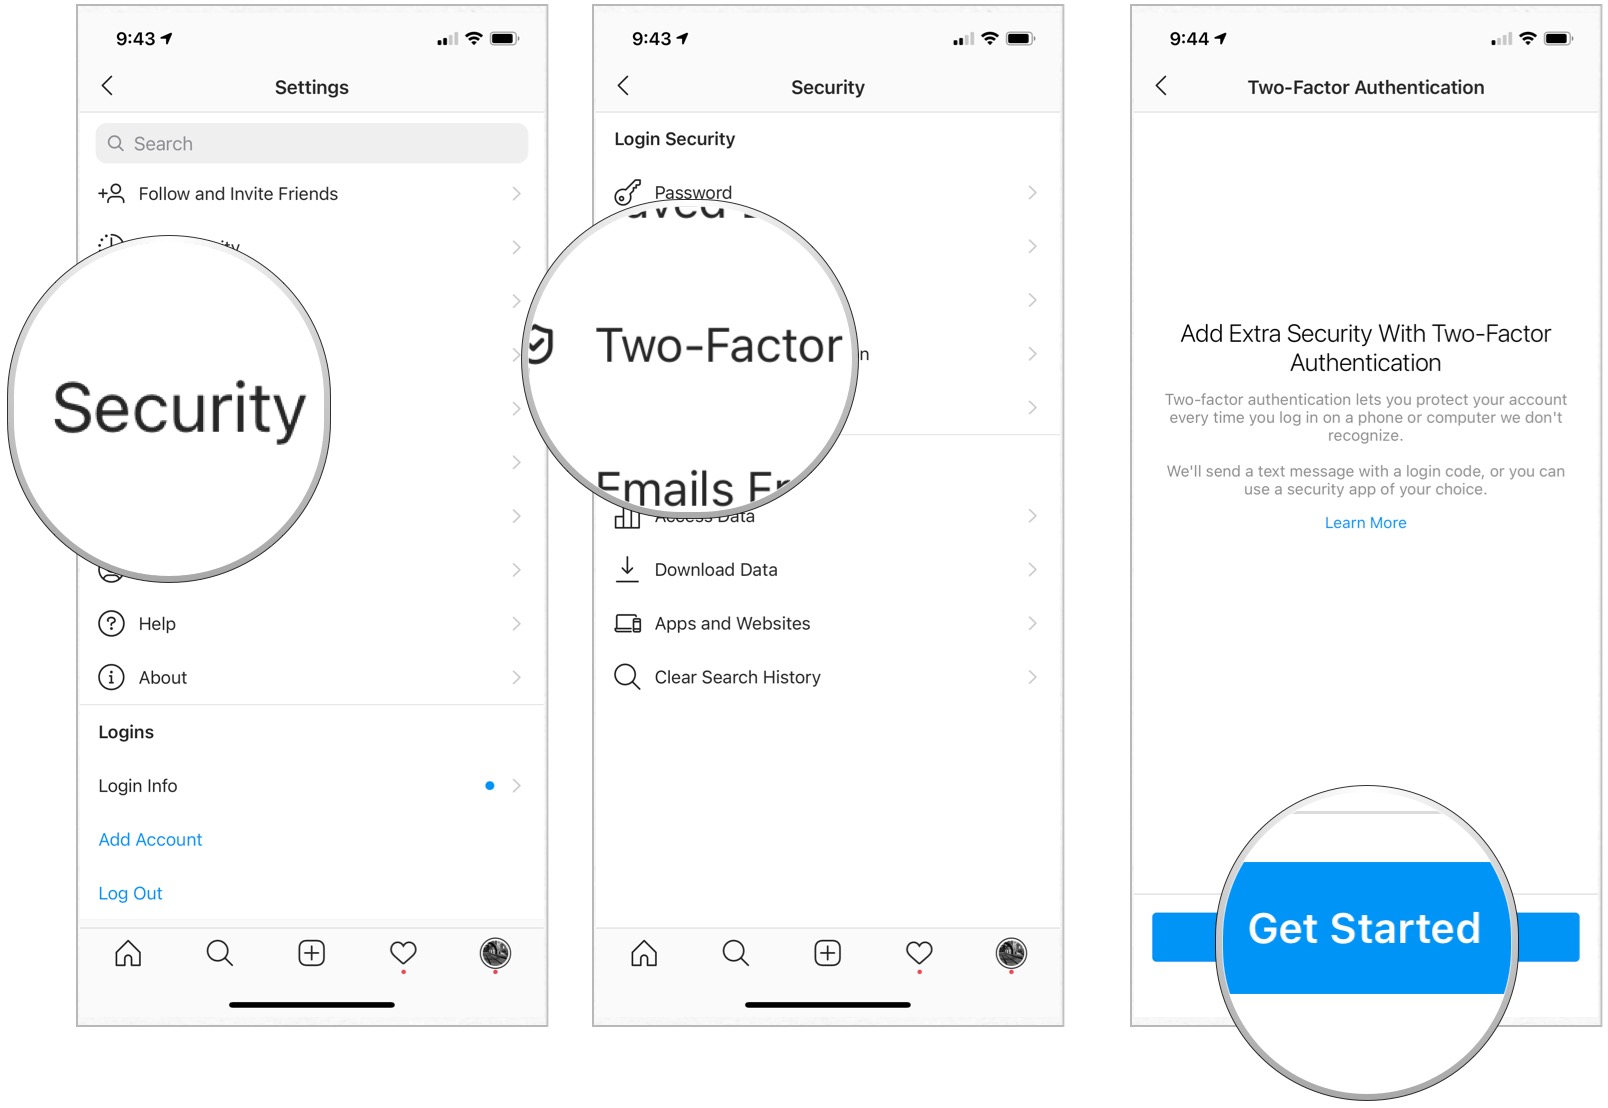 To set up two-factor authentication for Instagram, tap Security, then select Two-Factor Authentication. Next, choose Get Started.